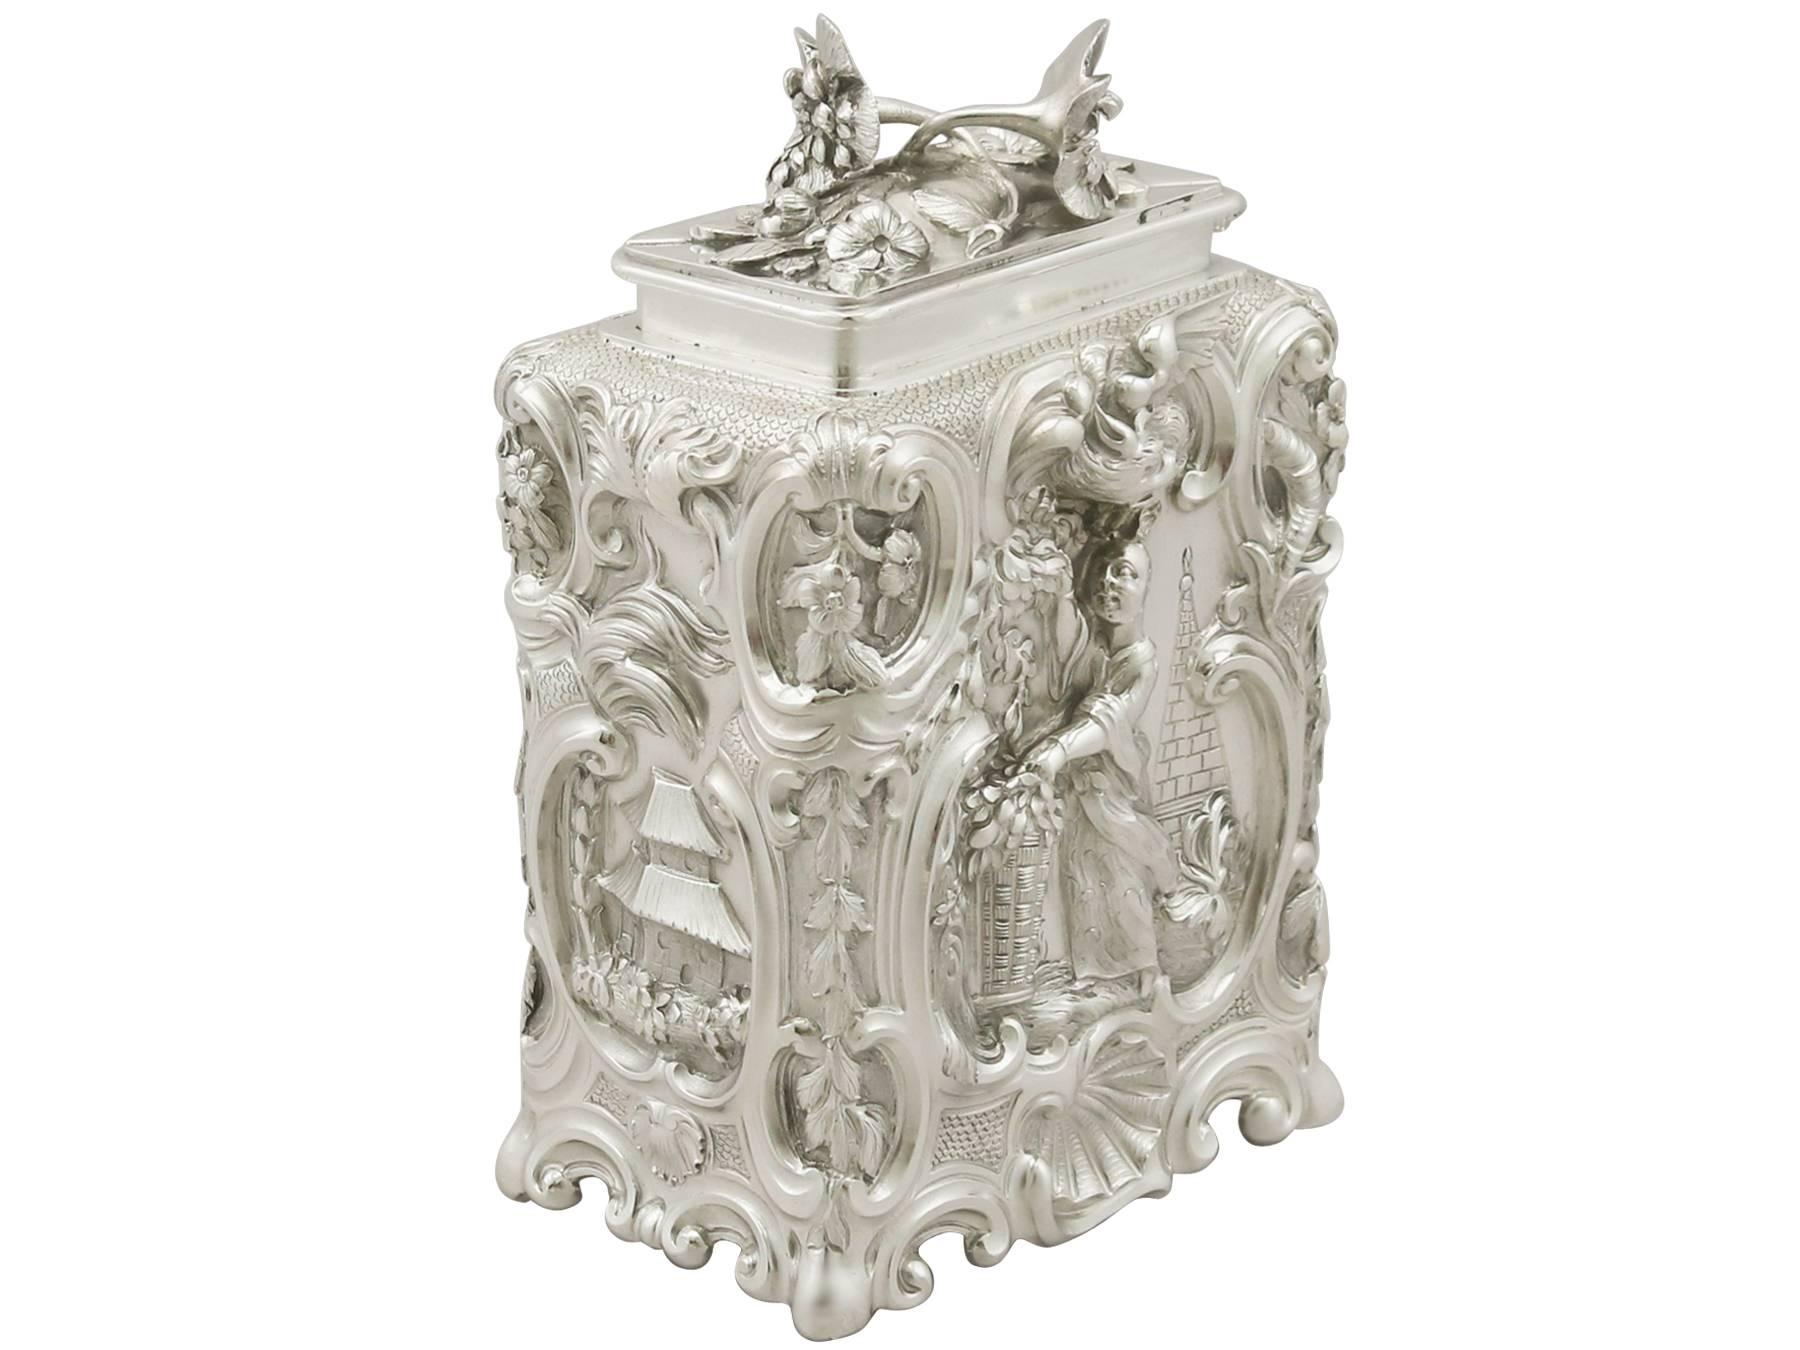 A magnificent, fine and impressive antique Georgian English sterling silver tea caddy; an addition to our silver teaware collection

This magnificent antique George III sterling silver tea caddy has an oblong shaped form.

The anterior and